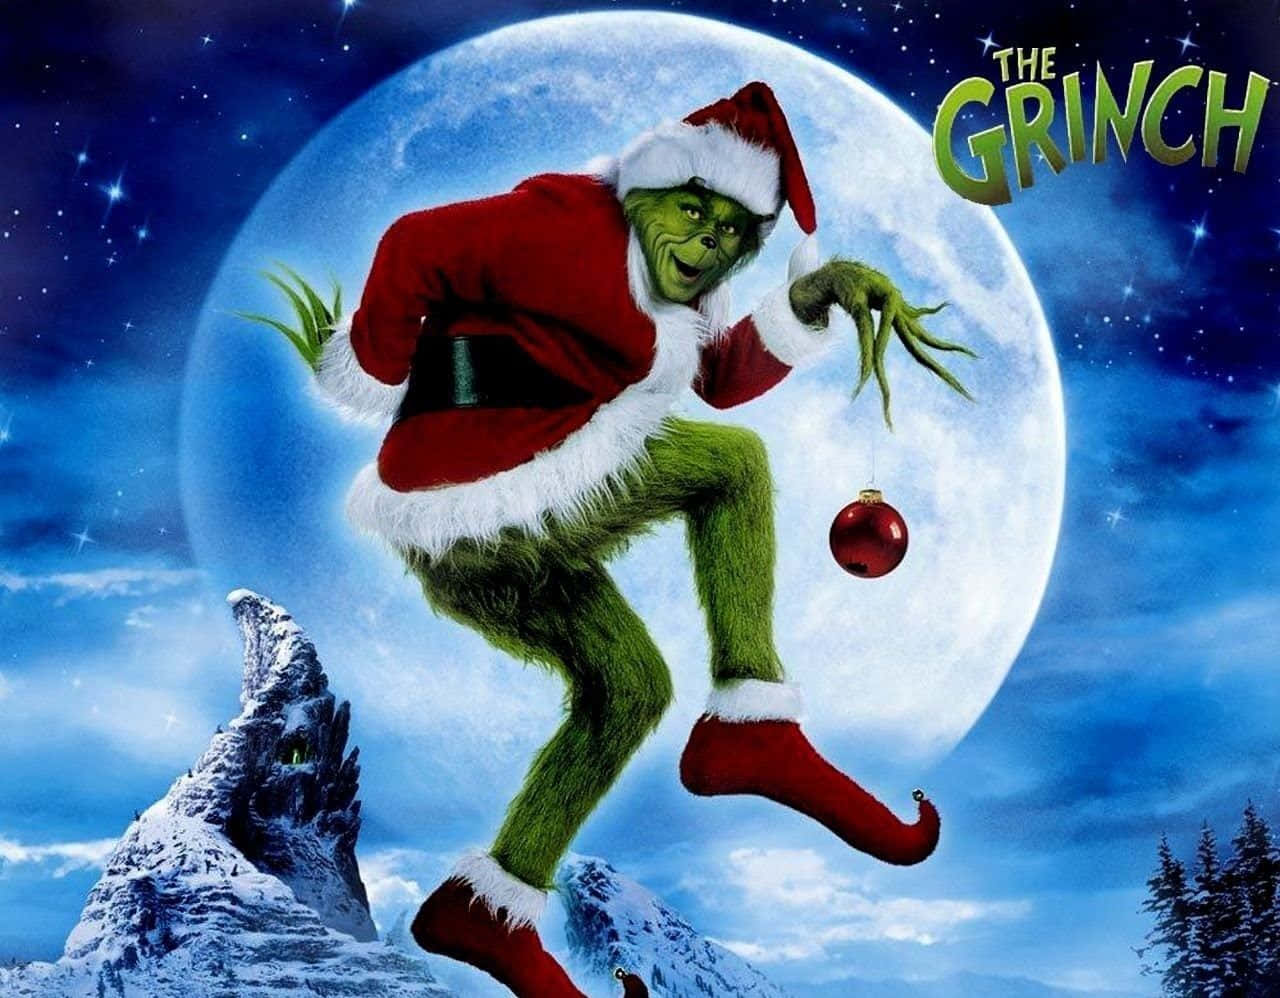 The Grinch Christmas Movie Poster